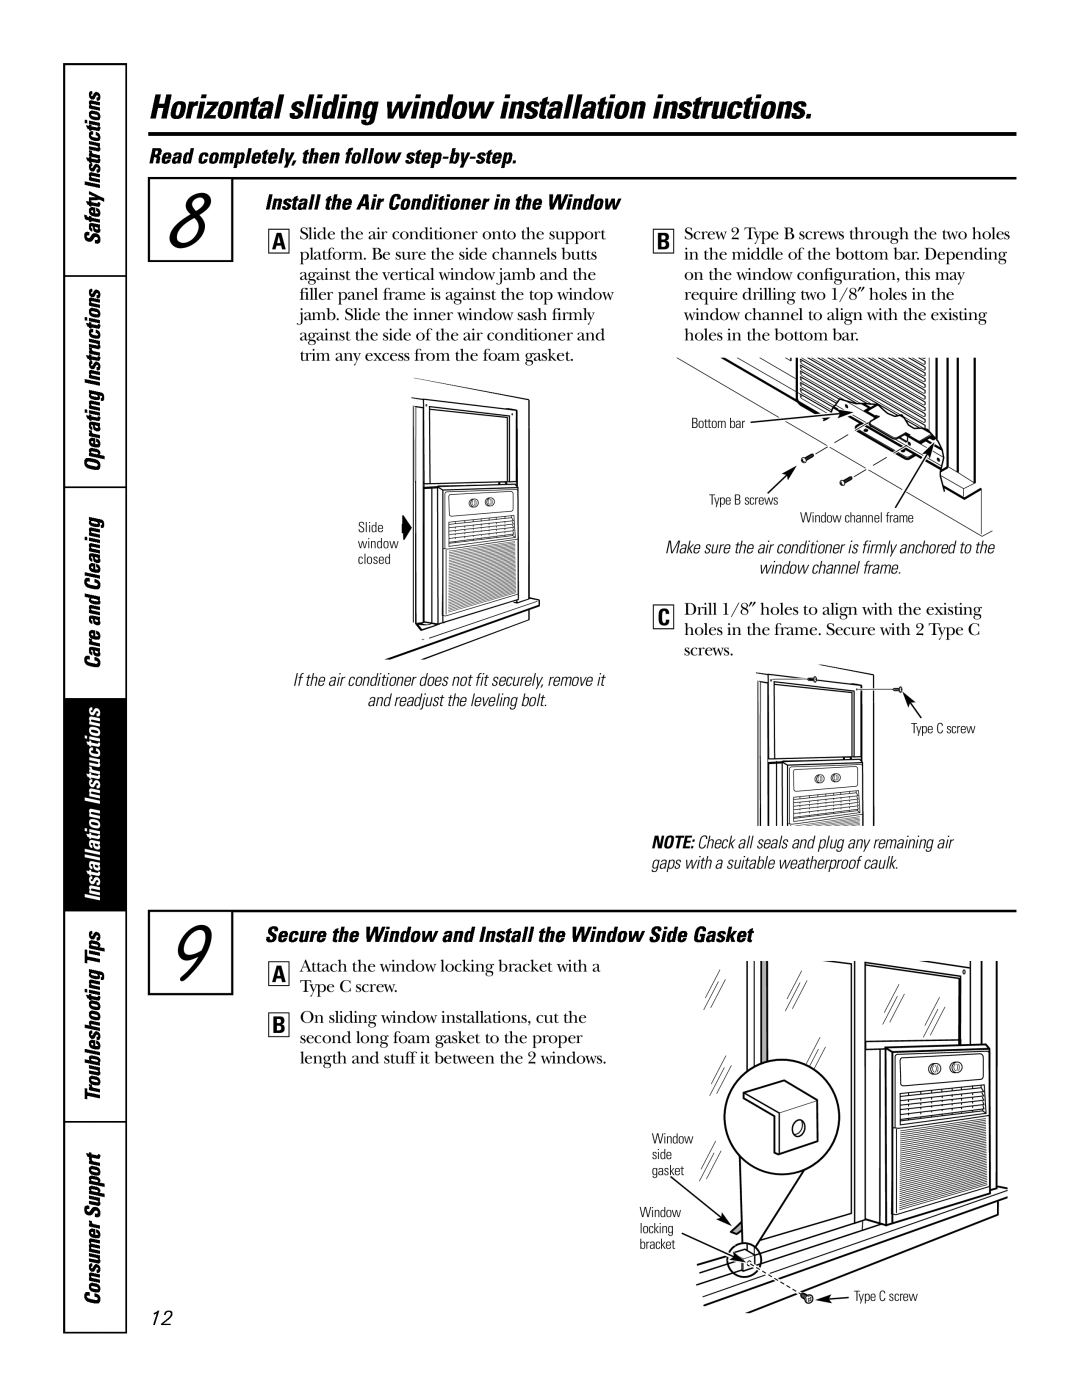 GE AGX08 AGX10 Instructions, Read completely, then follow step-by-step, Install the Air Conditioner in the Window 